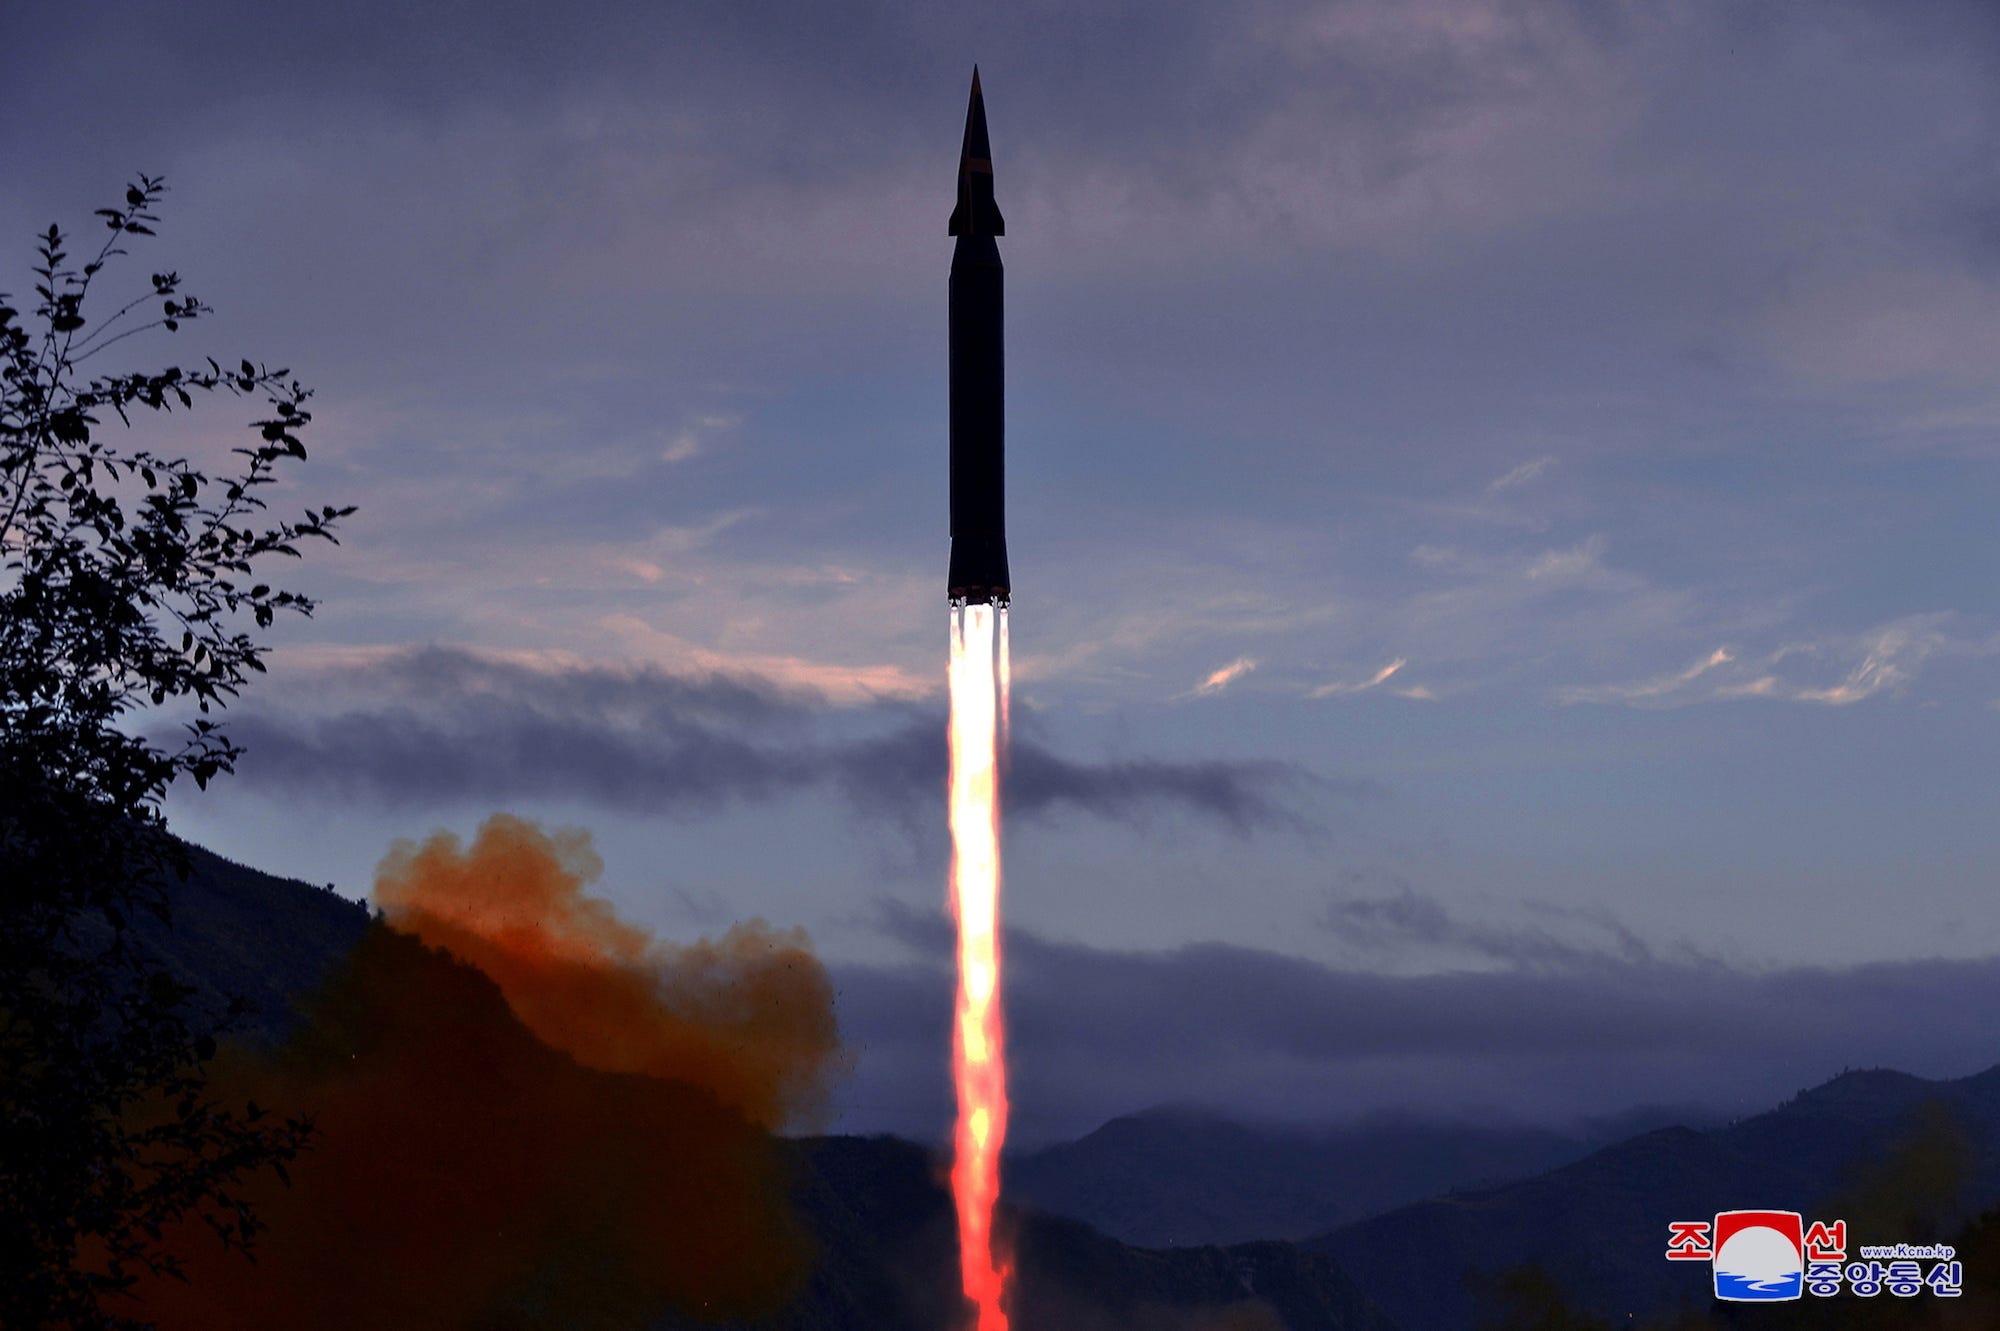 North Korea Hwasong-8 hypersonic missile